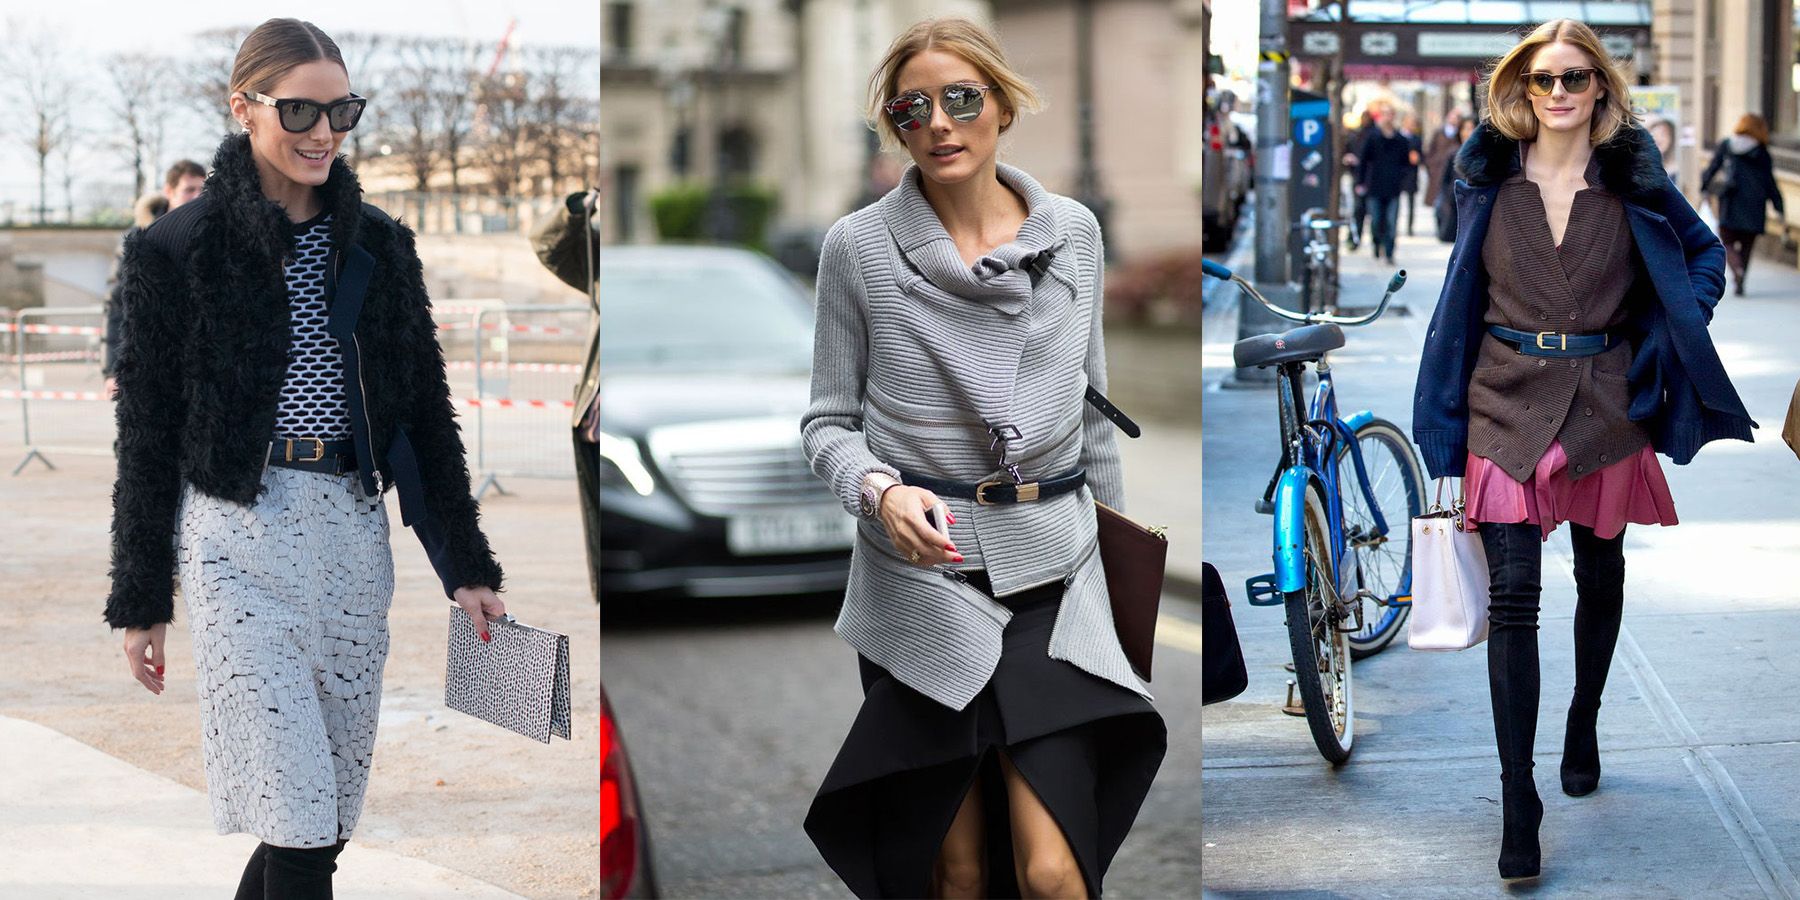 Let's Check Out a Stylish Look Wearing Olivia Palermo's Belt 